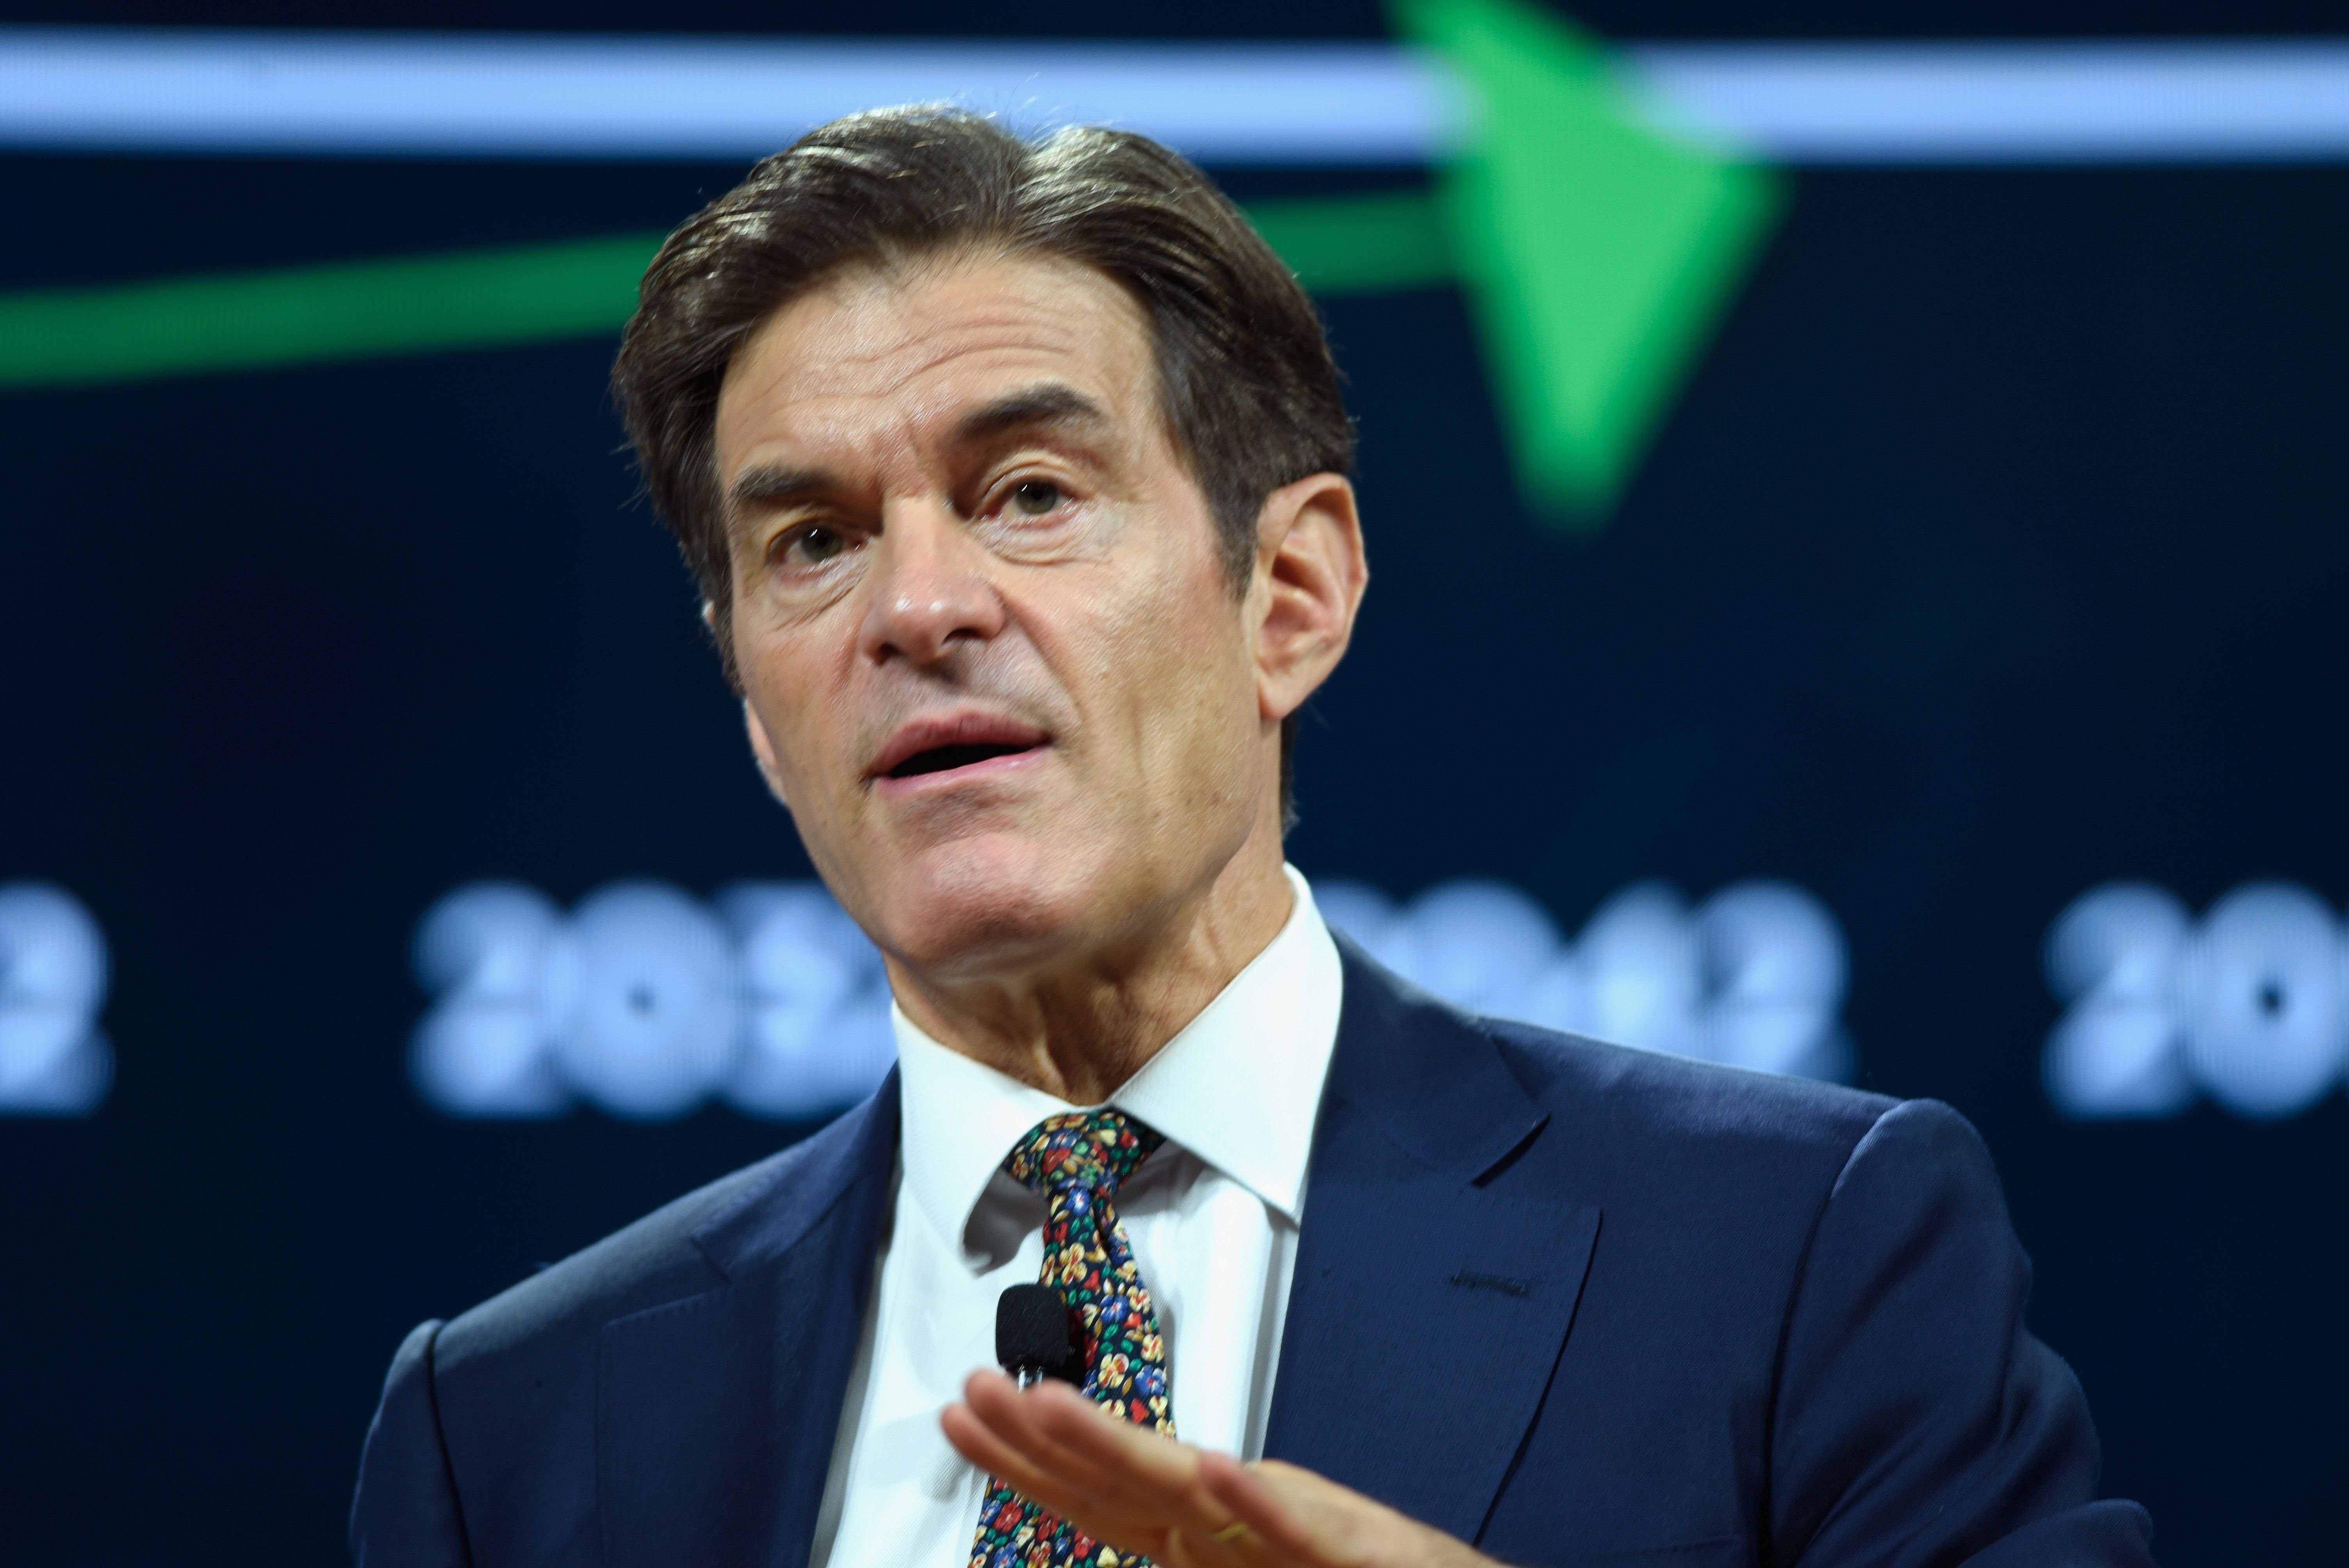 Dr. Mehmet Oz, spoke at The 2017 Concordia Annual Summit at Grand Hyatt New York on September 19, 2017 | Photo: Getty Images